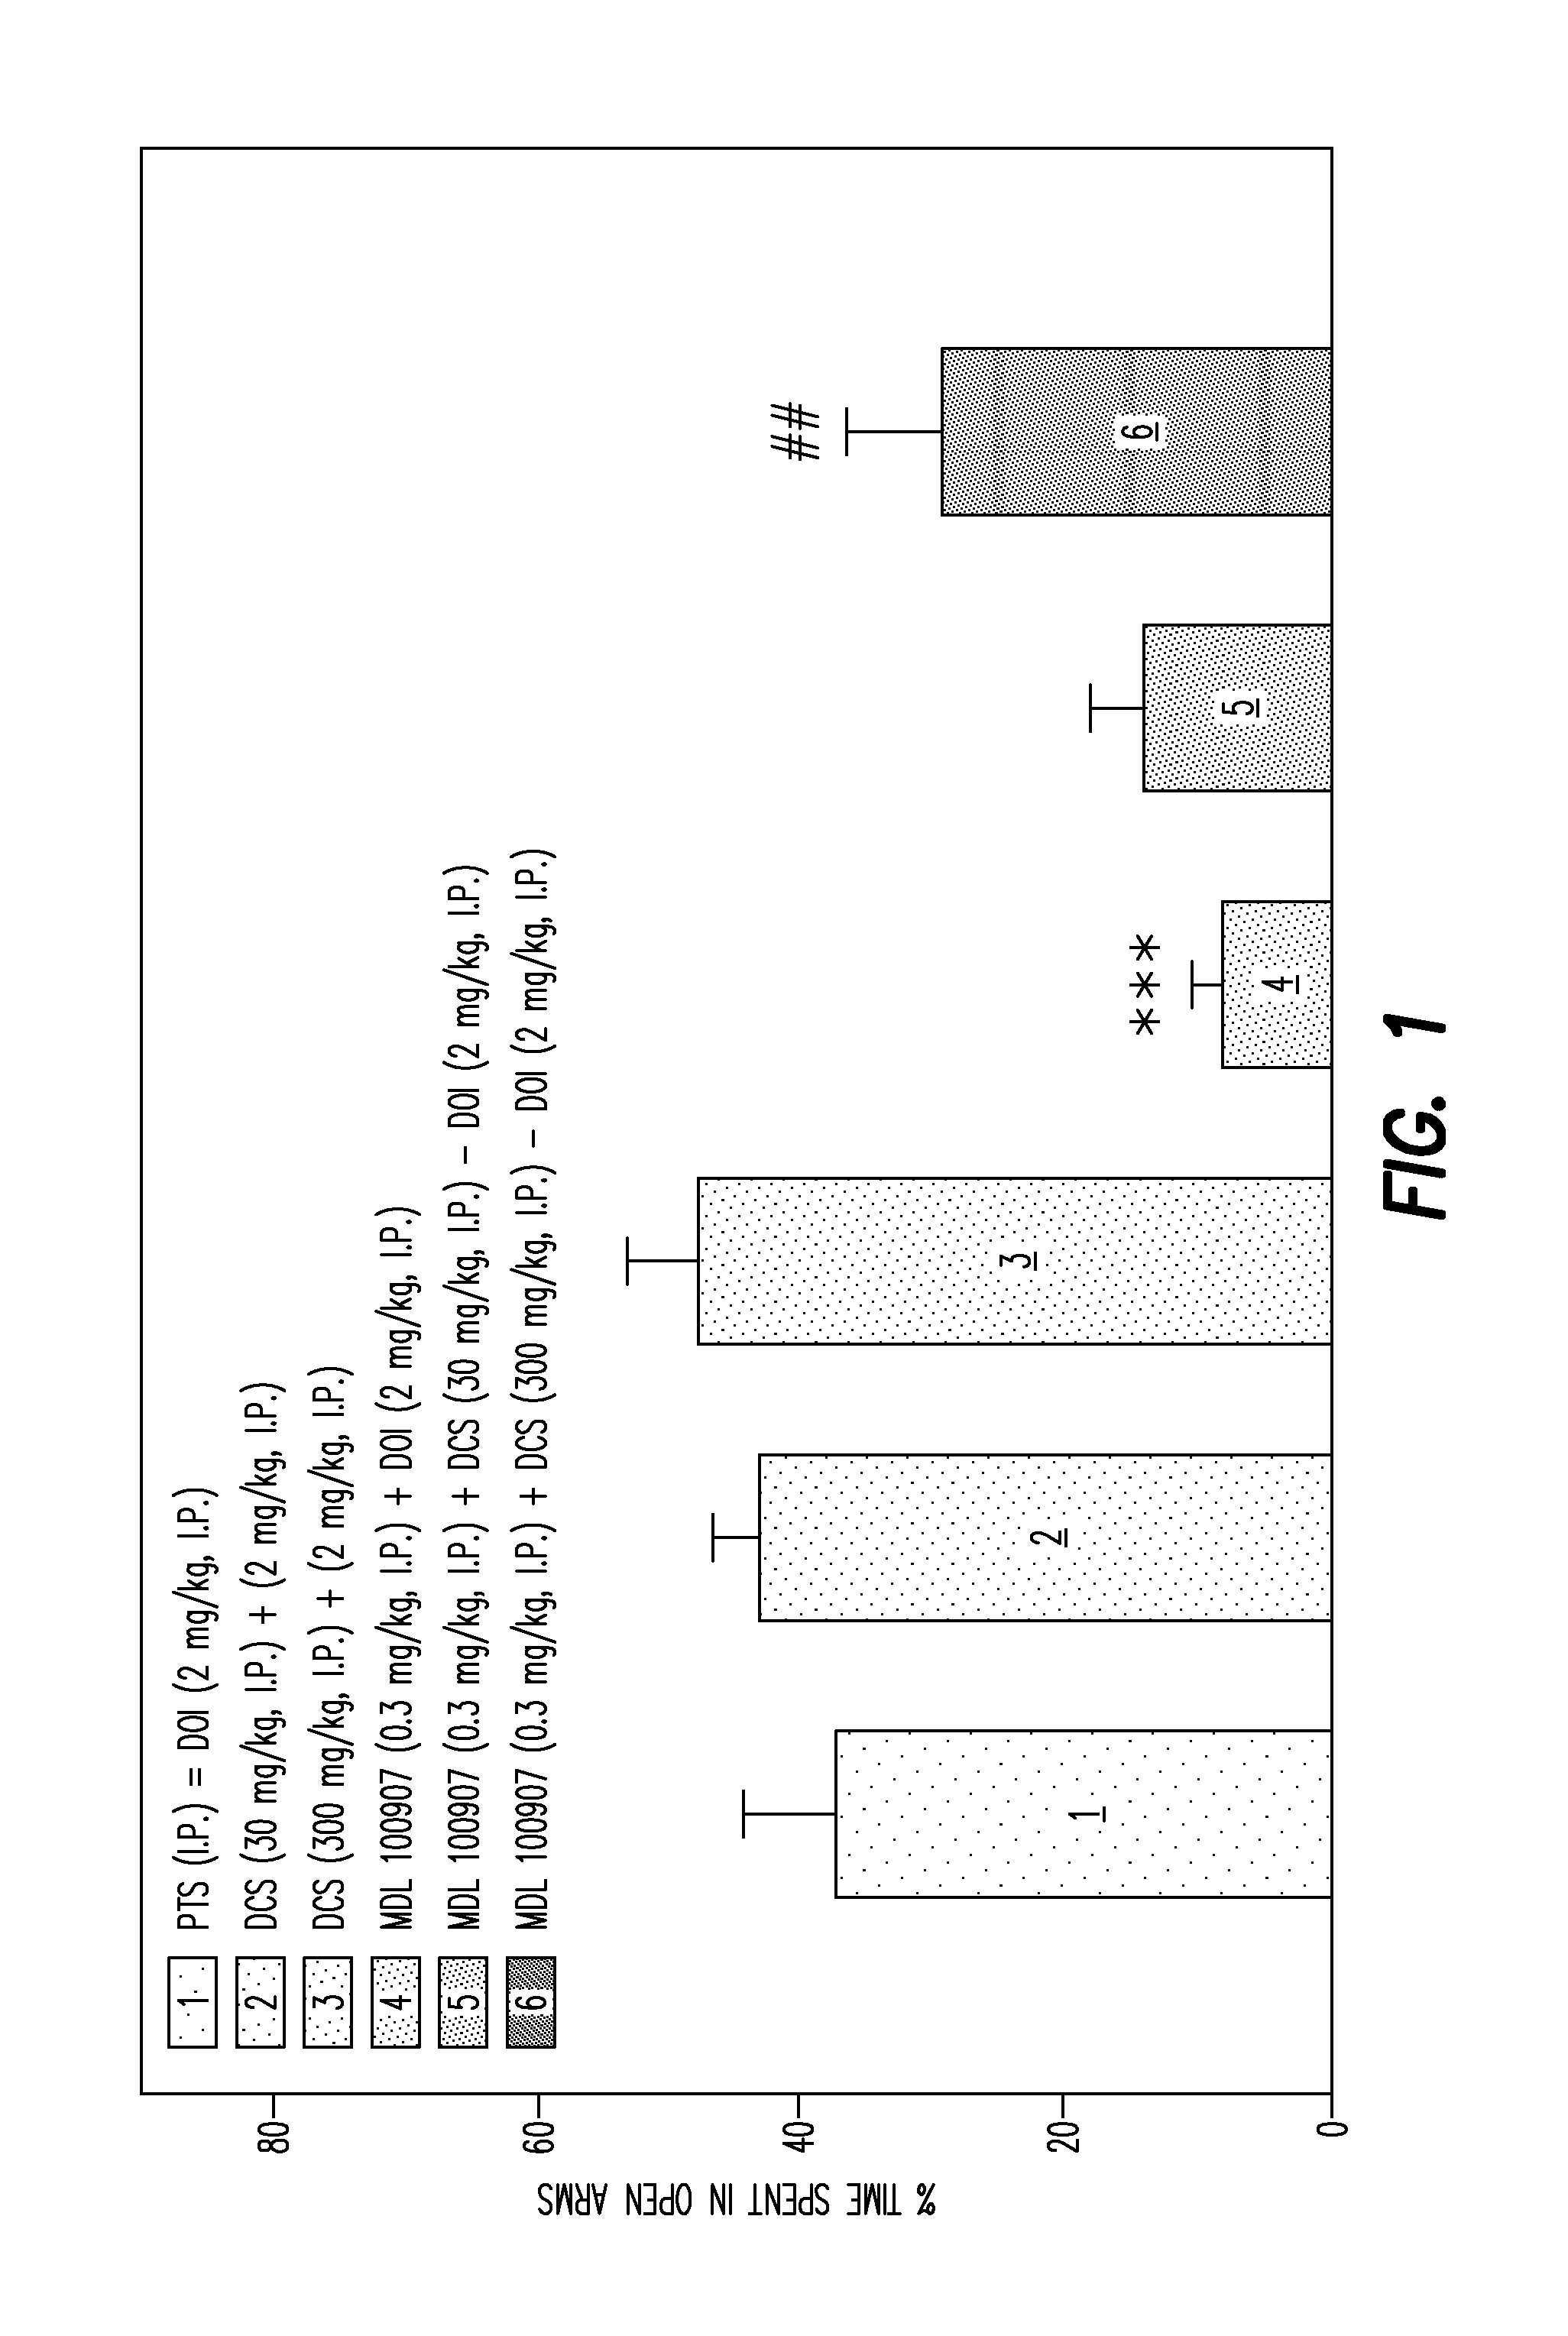 Composition and Method for Treatment of Depression and Psychosis in Humans